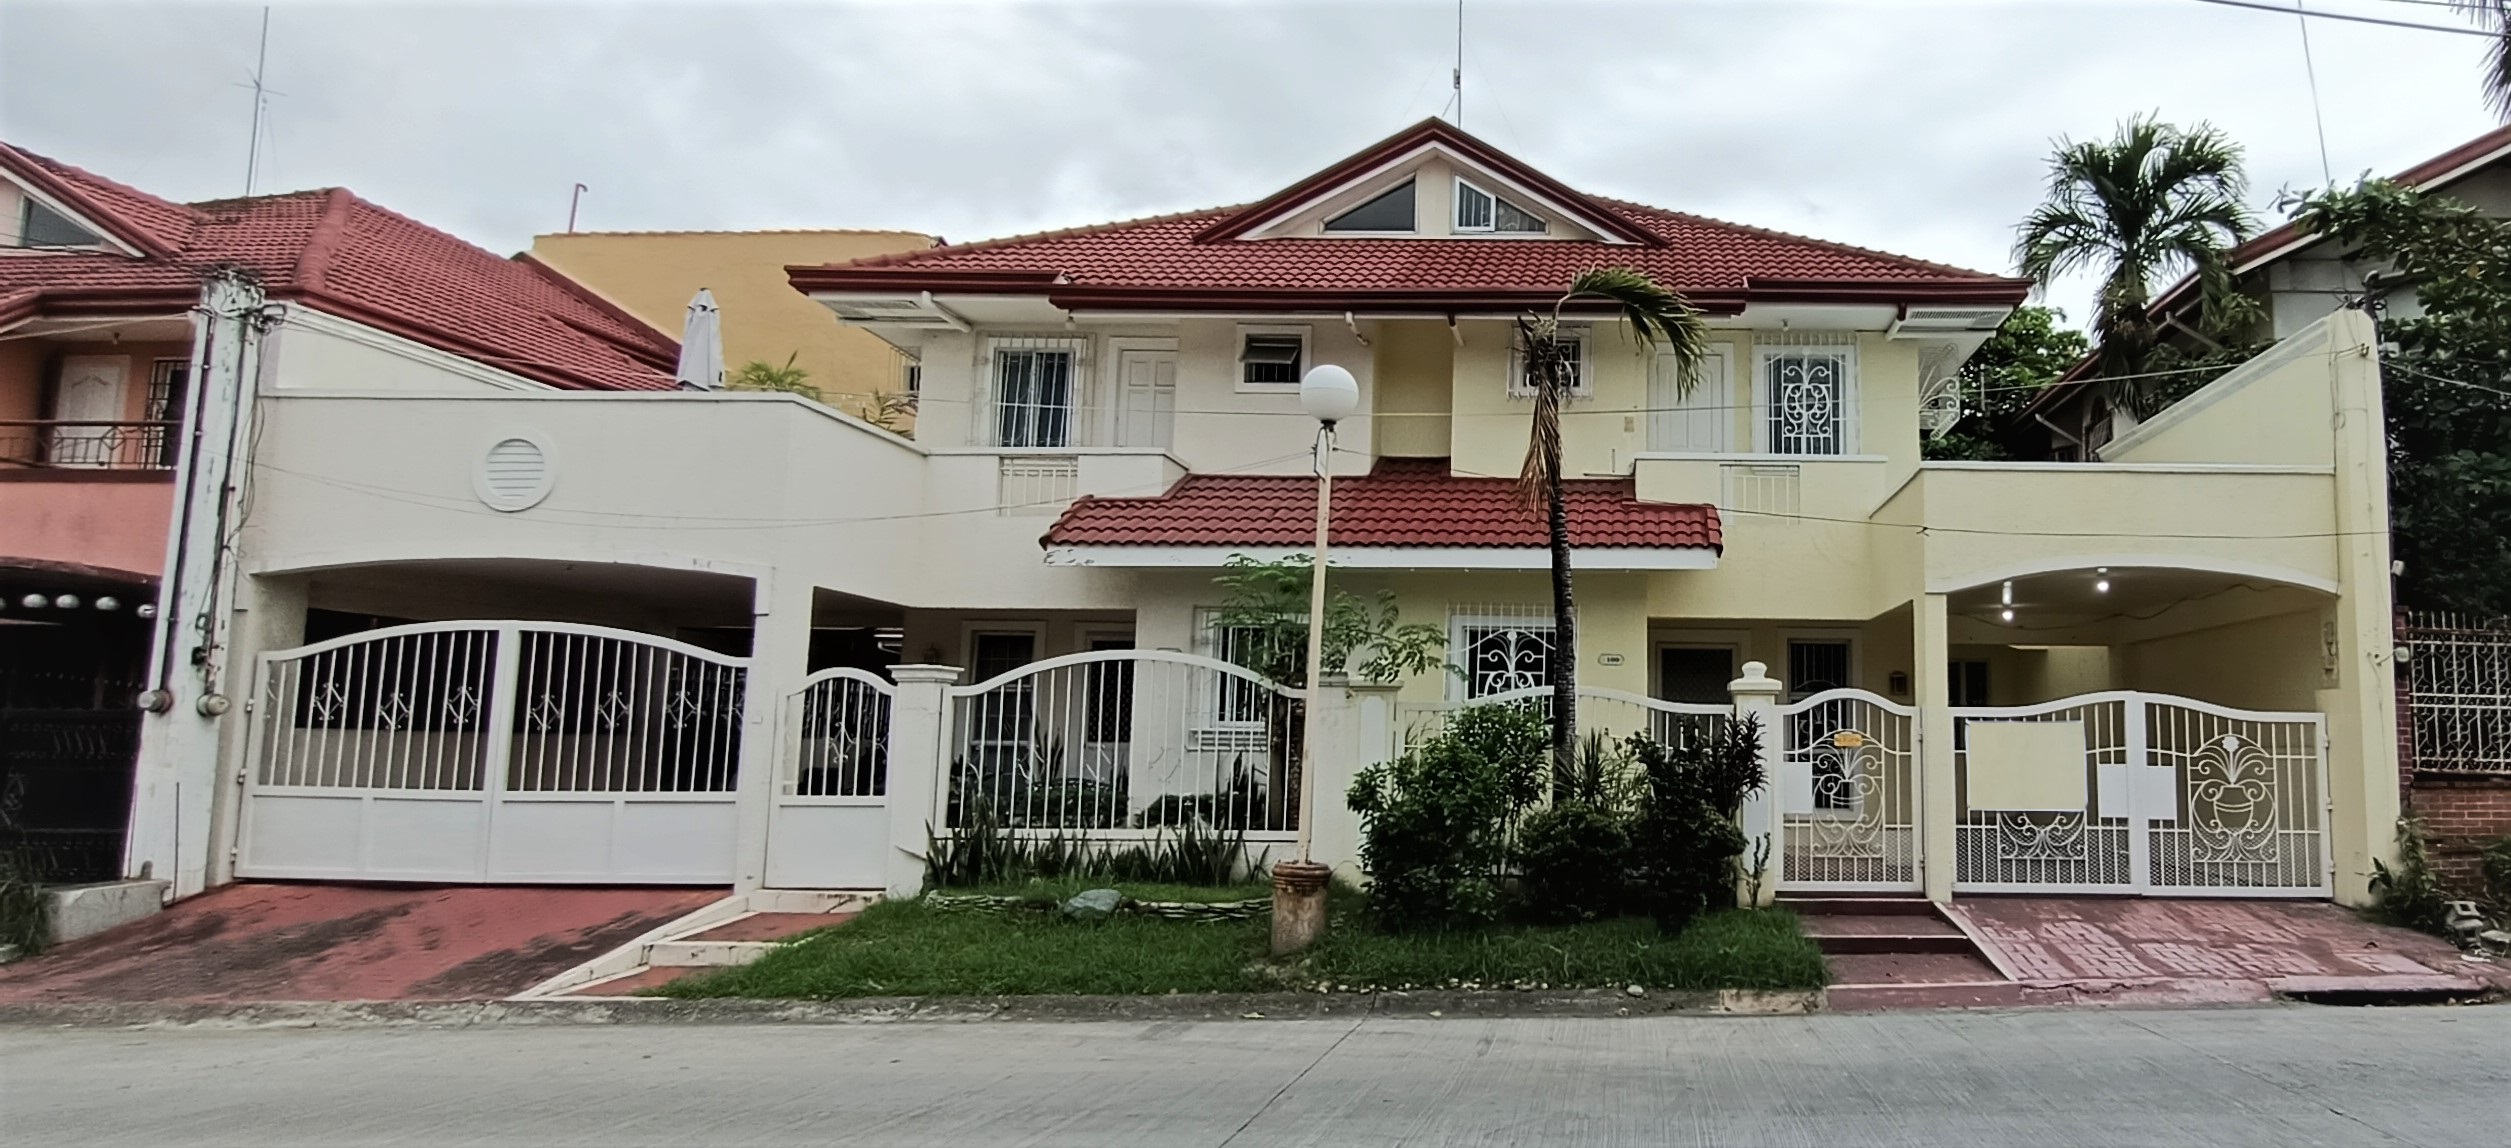 Duplex House For Sale in Bf Resort